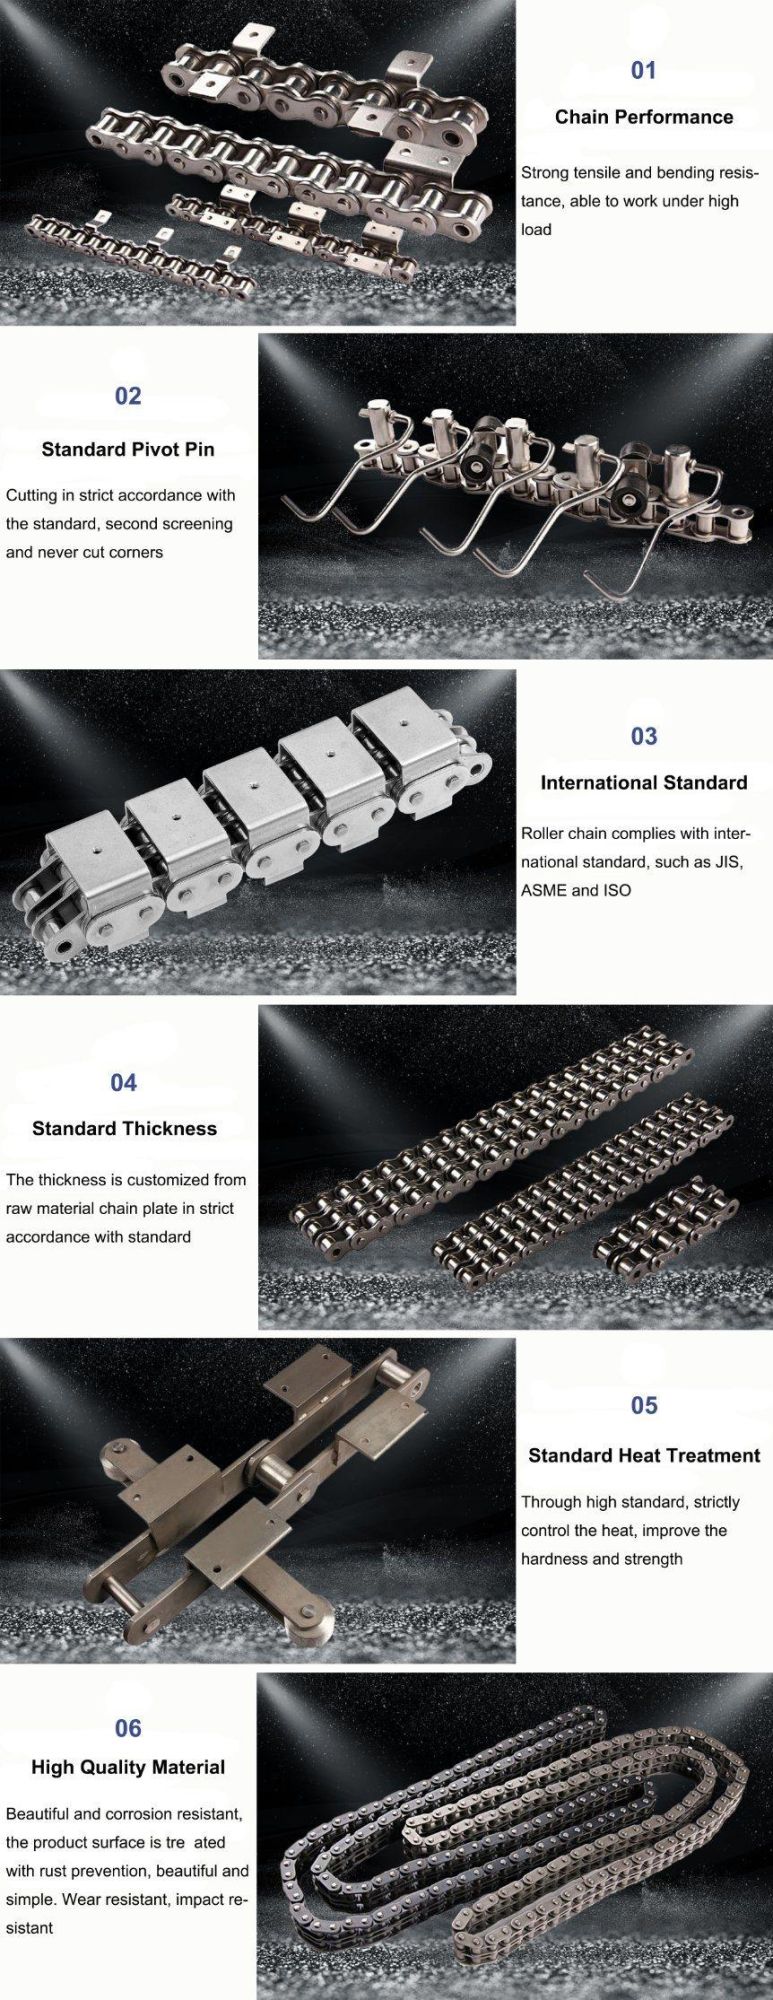 DIN ISO Standard Welded Conveyor Transmission Roller Chain with Attachments